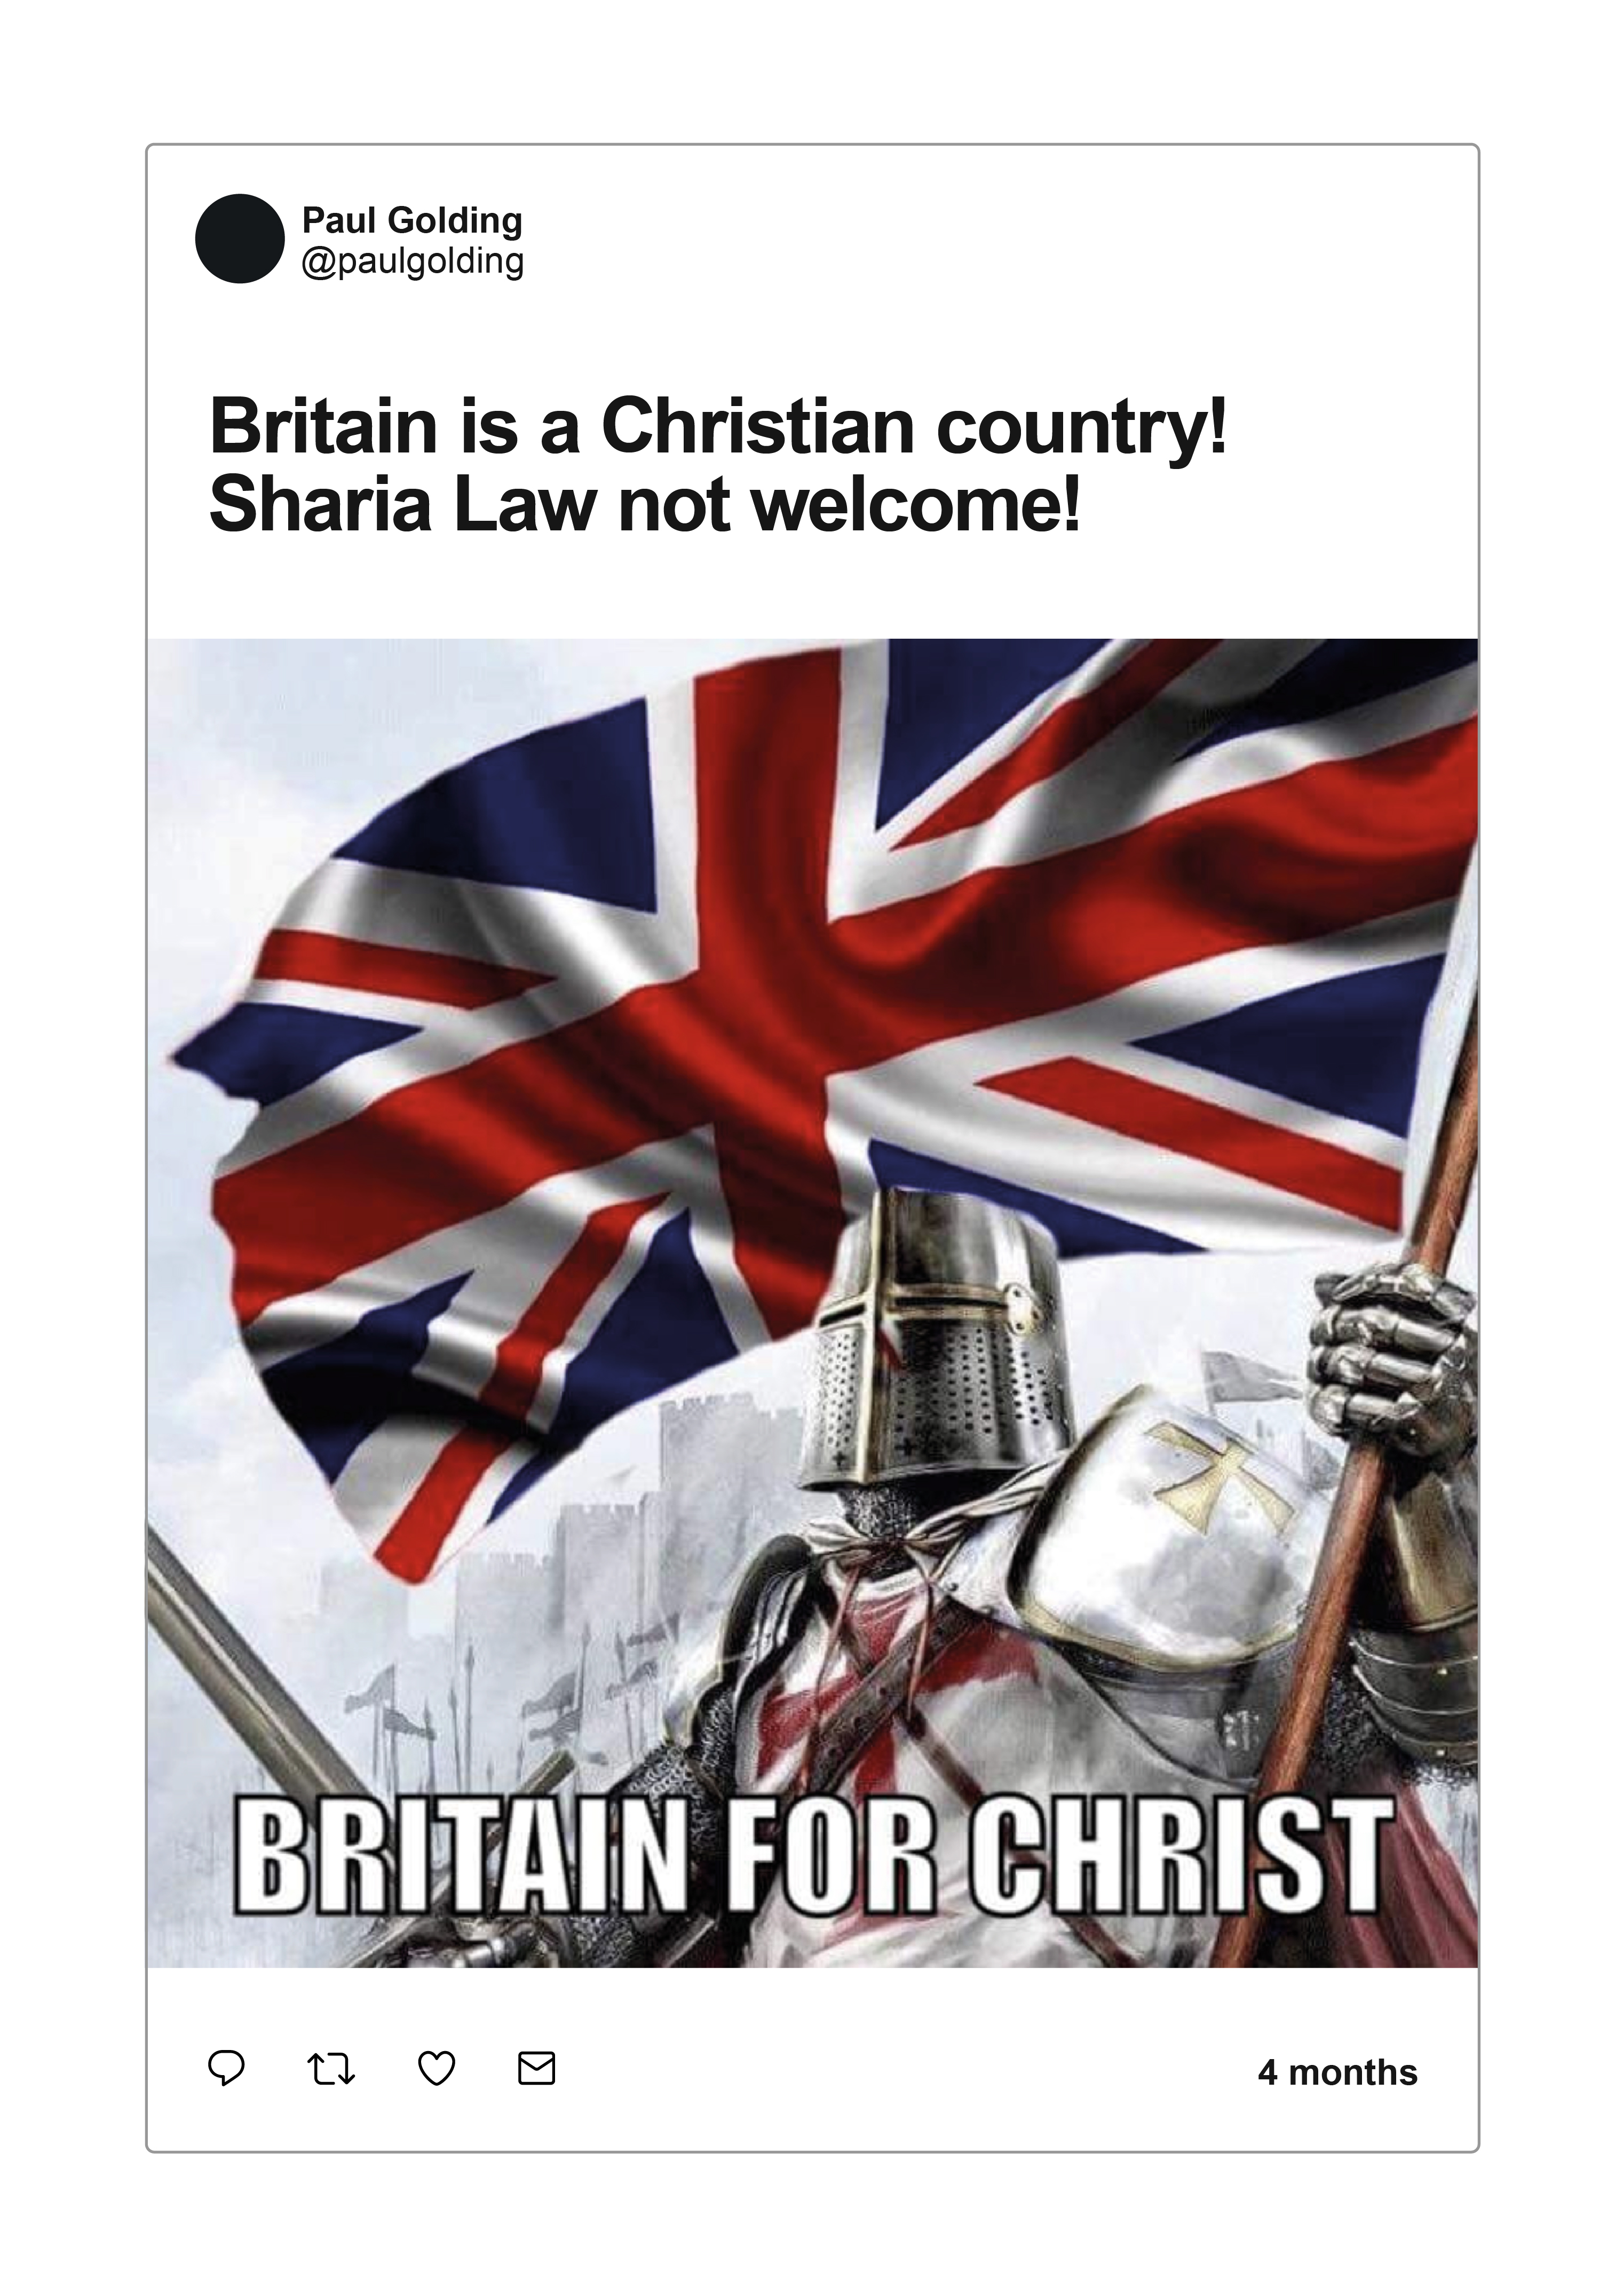 narratives-hate-spectrum-far-right-worldviews-uk - Figure 3.2: GAB Post by Paul Golding on Britain being a Christian Country